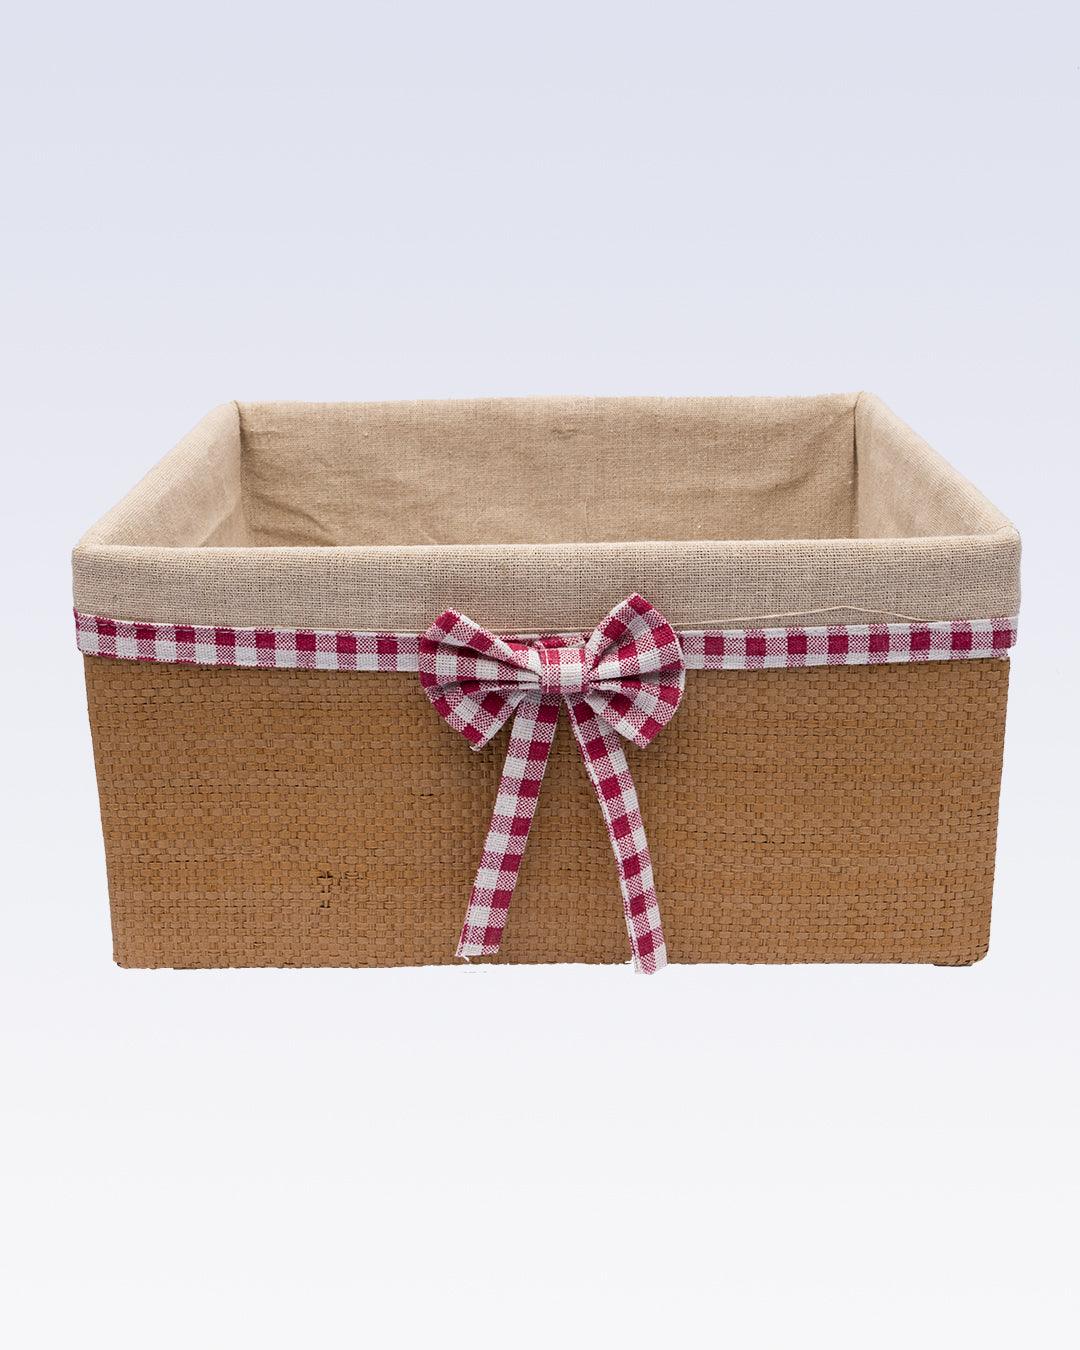 Fabric Basket, for Home Storage, Gingham Print Ribbon, Natural Colour, Paper &Fabric, Set of 3 - MARKET 99